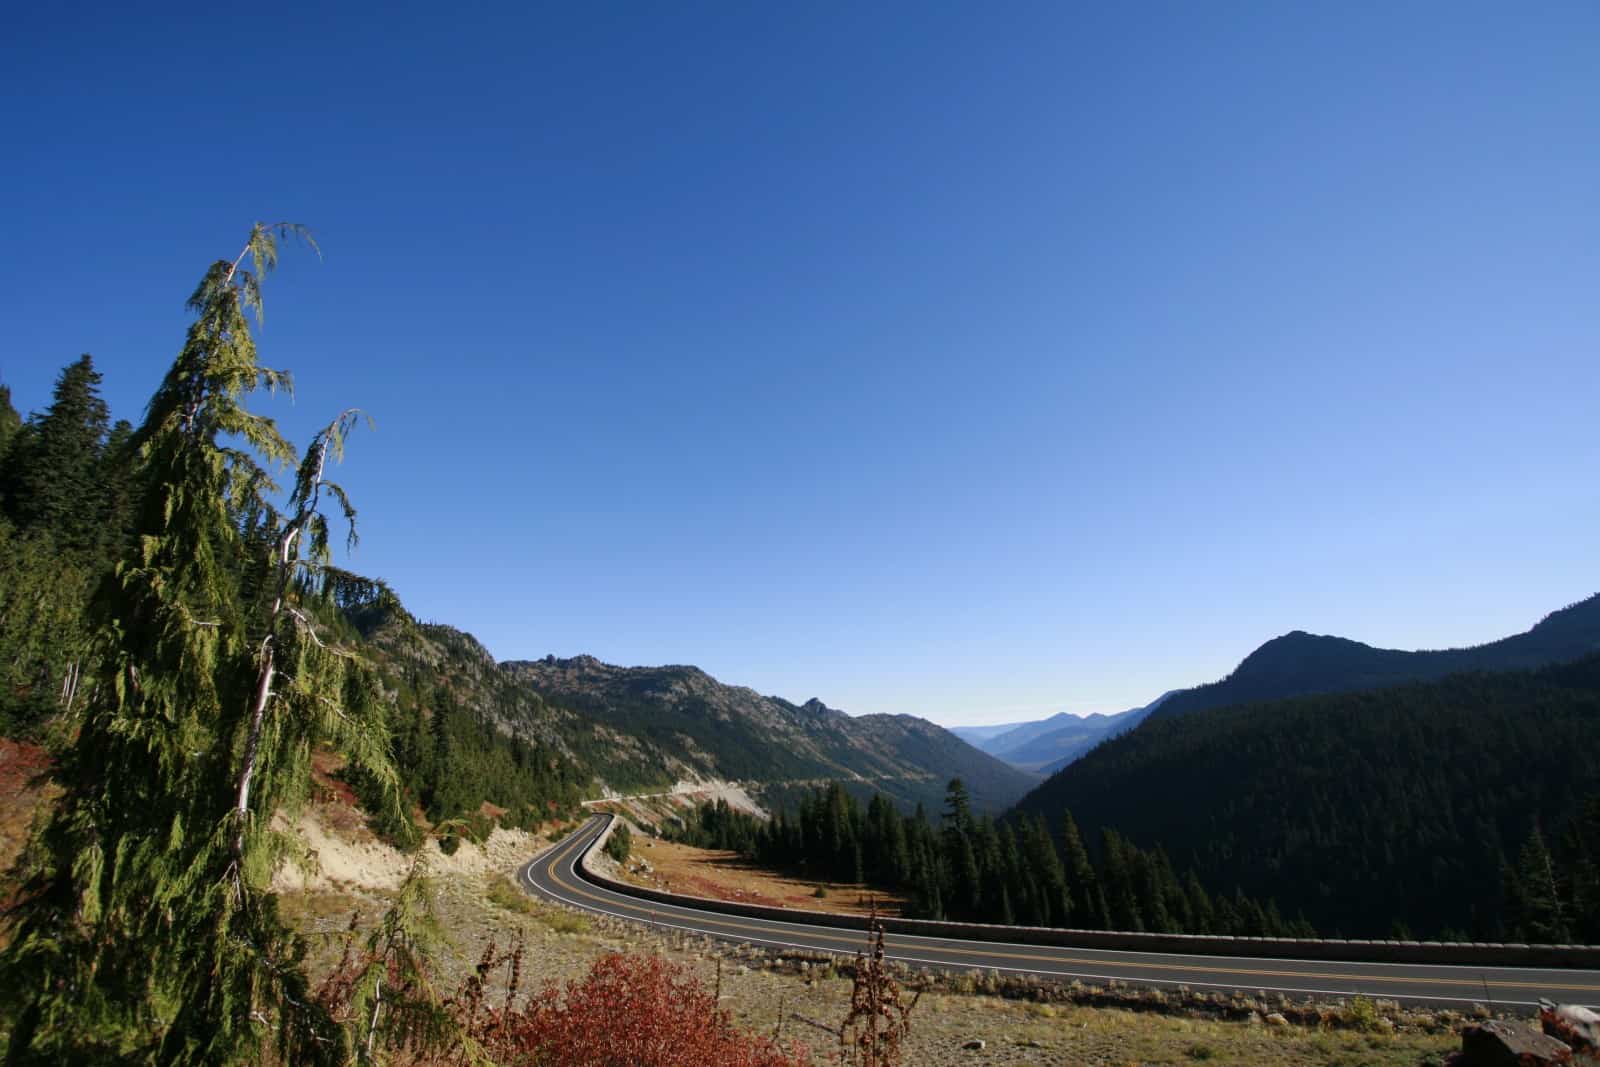 Emergency repairs to sections of SR 410 Chinook Pass starts Wednesday